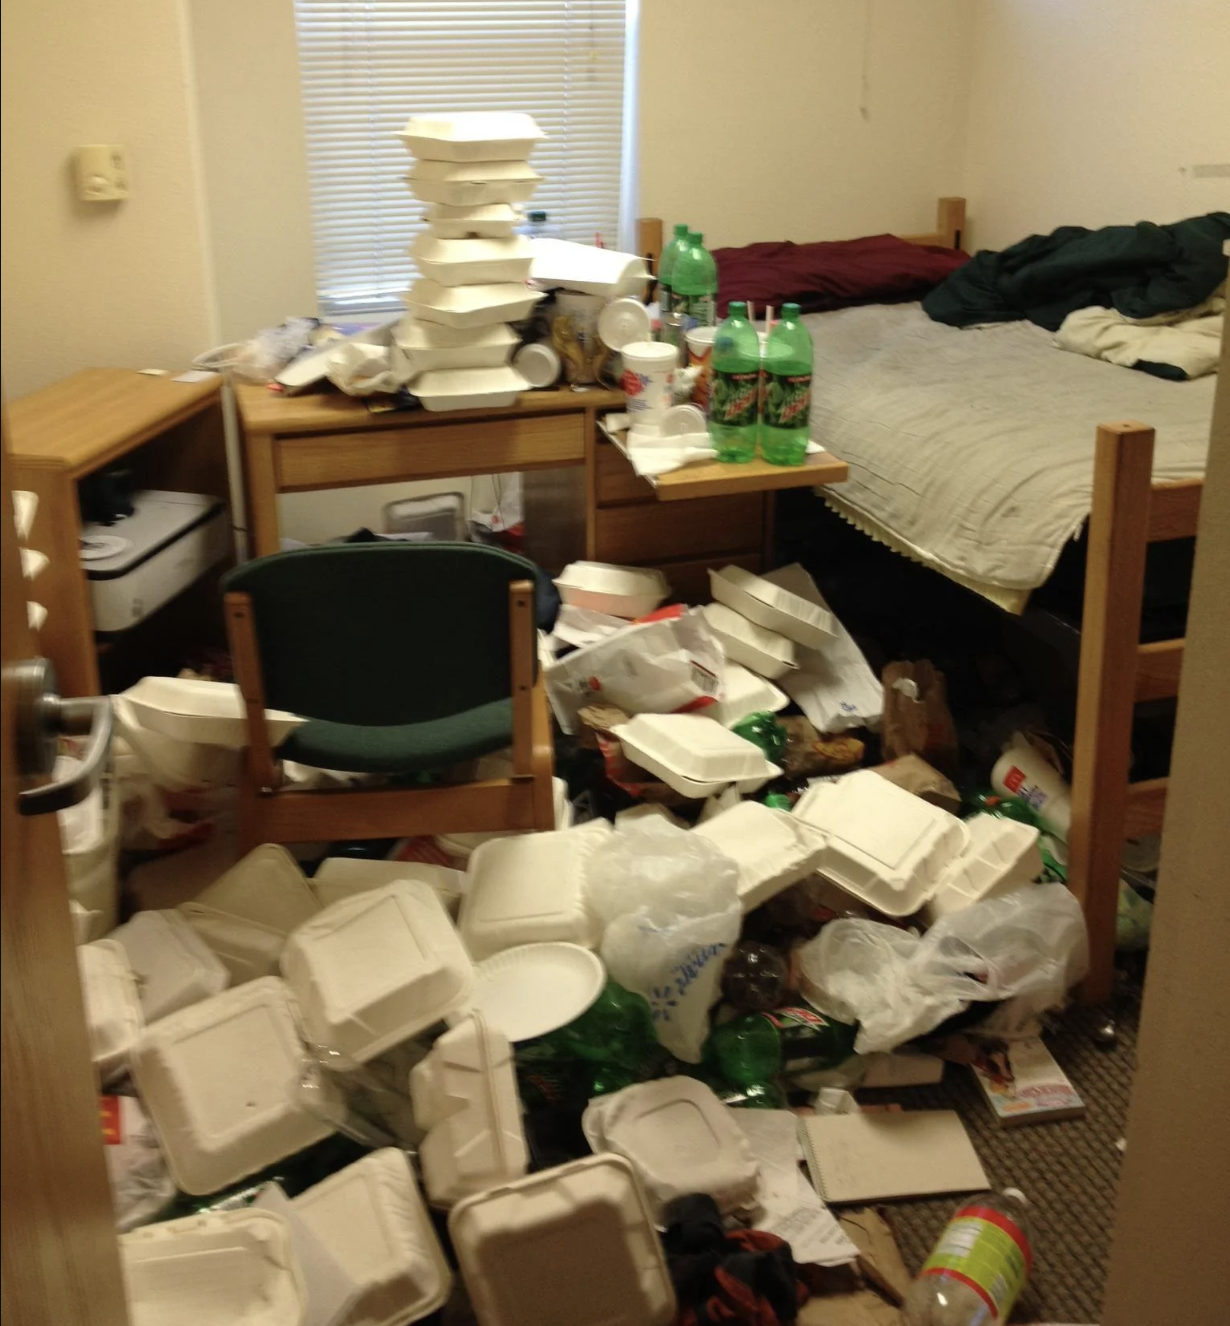 College dorm room filled with piles of to-go boxes and soda bottles